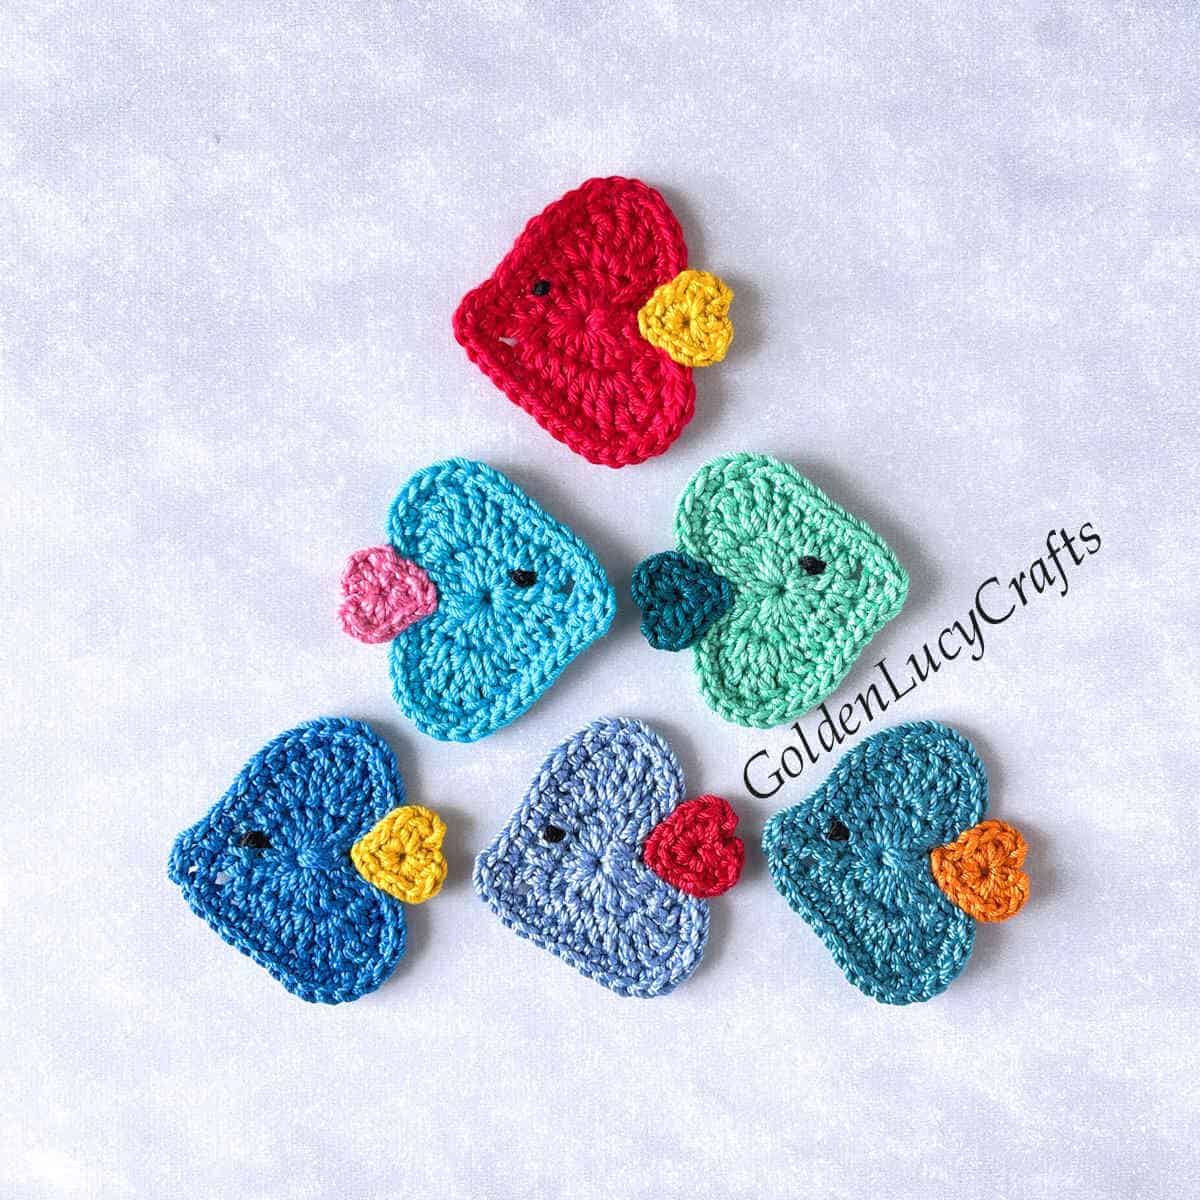 Crocheted fish appliques arranged into a triangular shape.